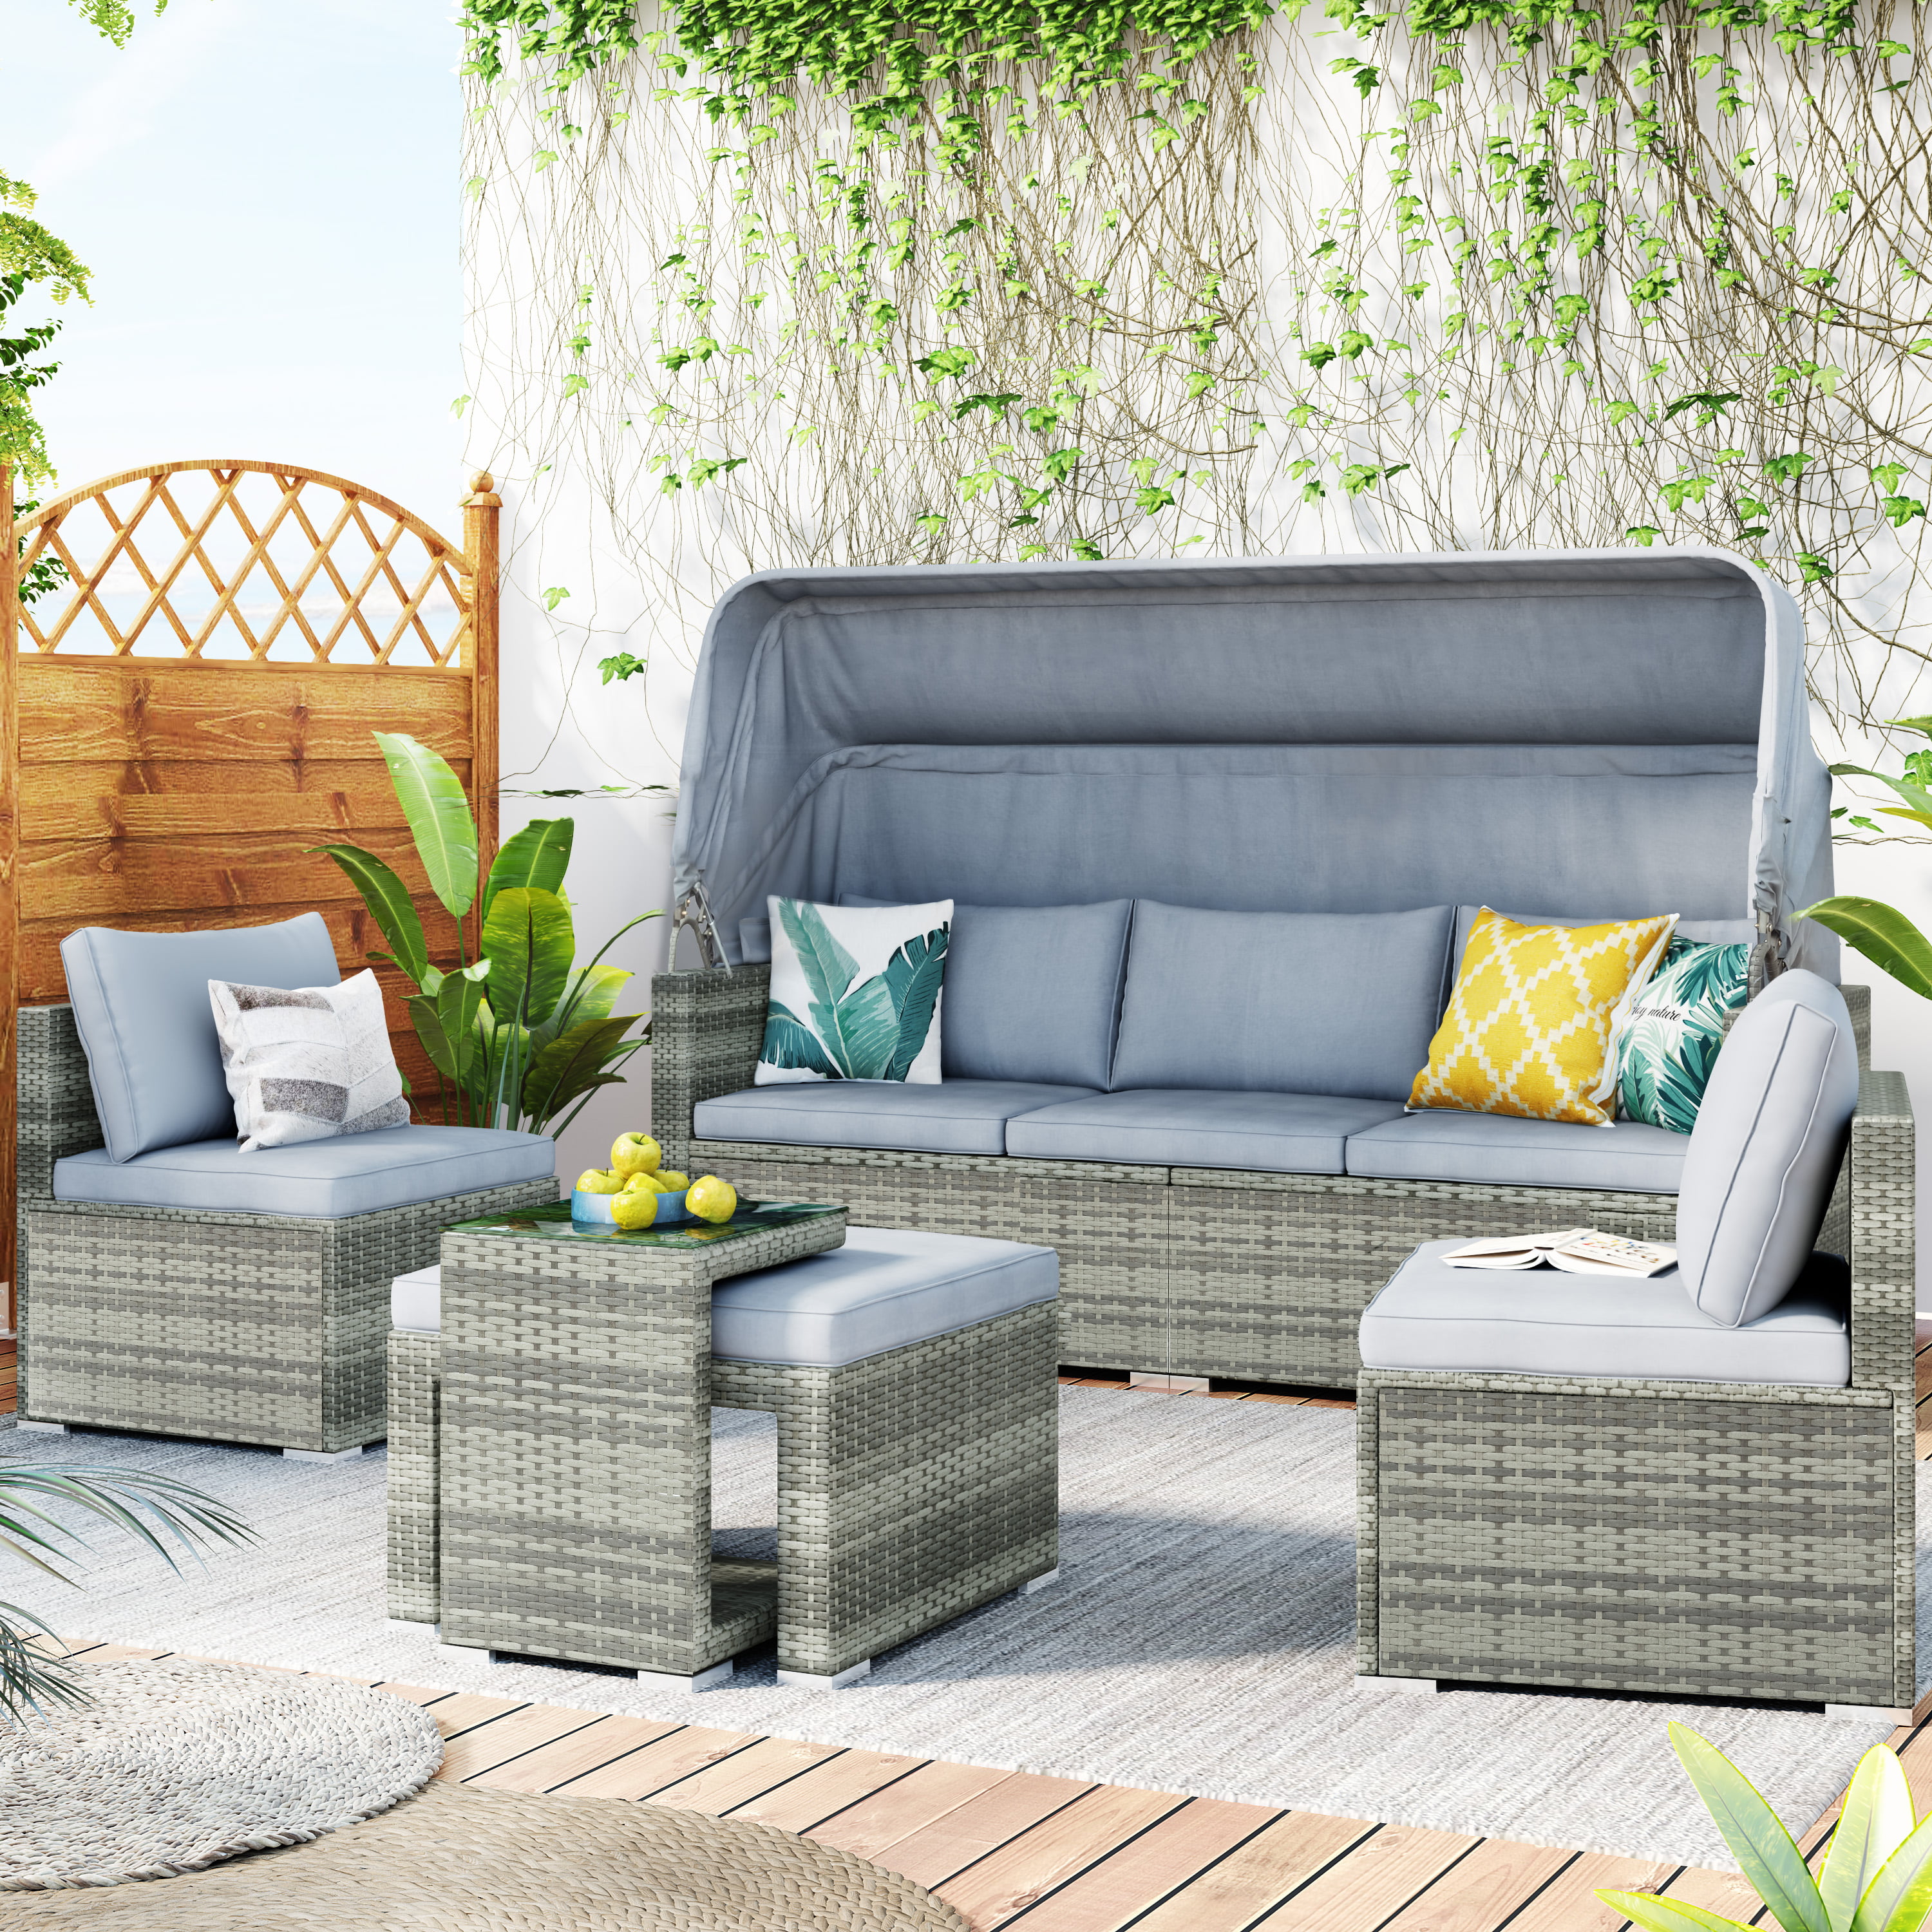 Rattan Conversation Sets Outdoor Wicker Rattan Furniture Sets Sectional Sofa Set w//Height Adjustable Coffee Table DORTALA Patio Round Daybed with Retractable Canopy